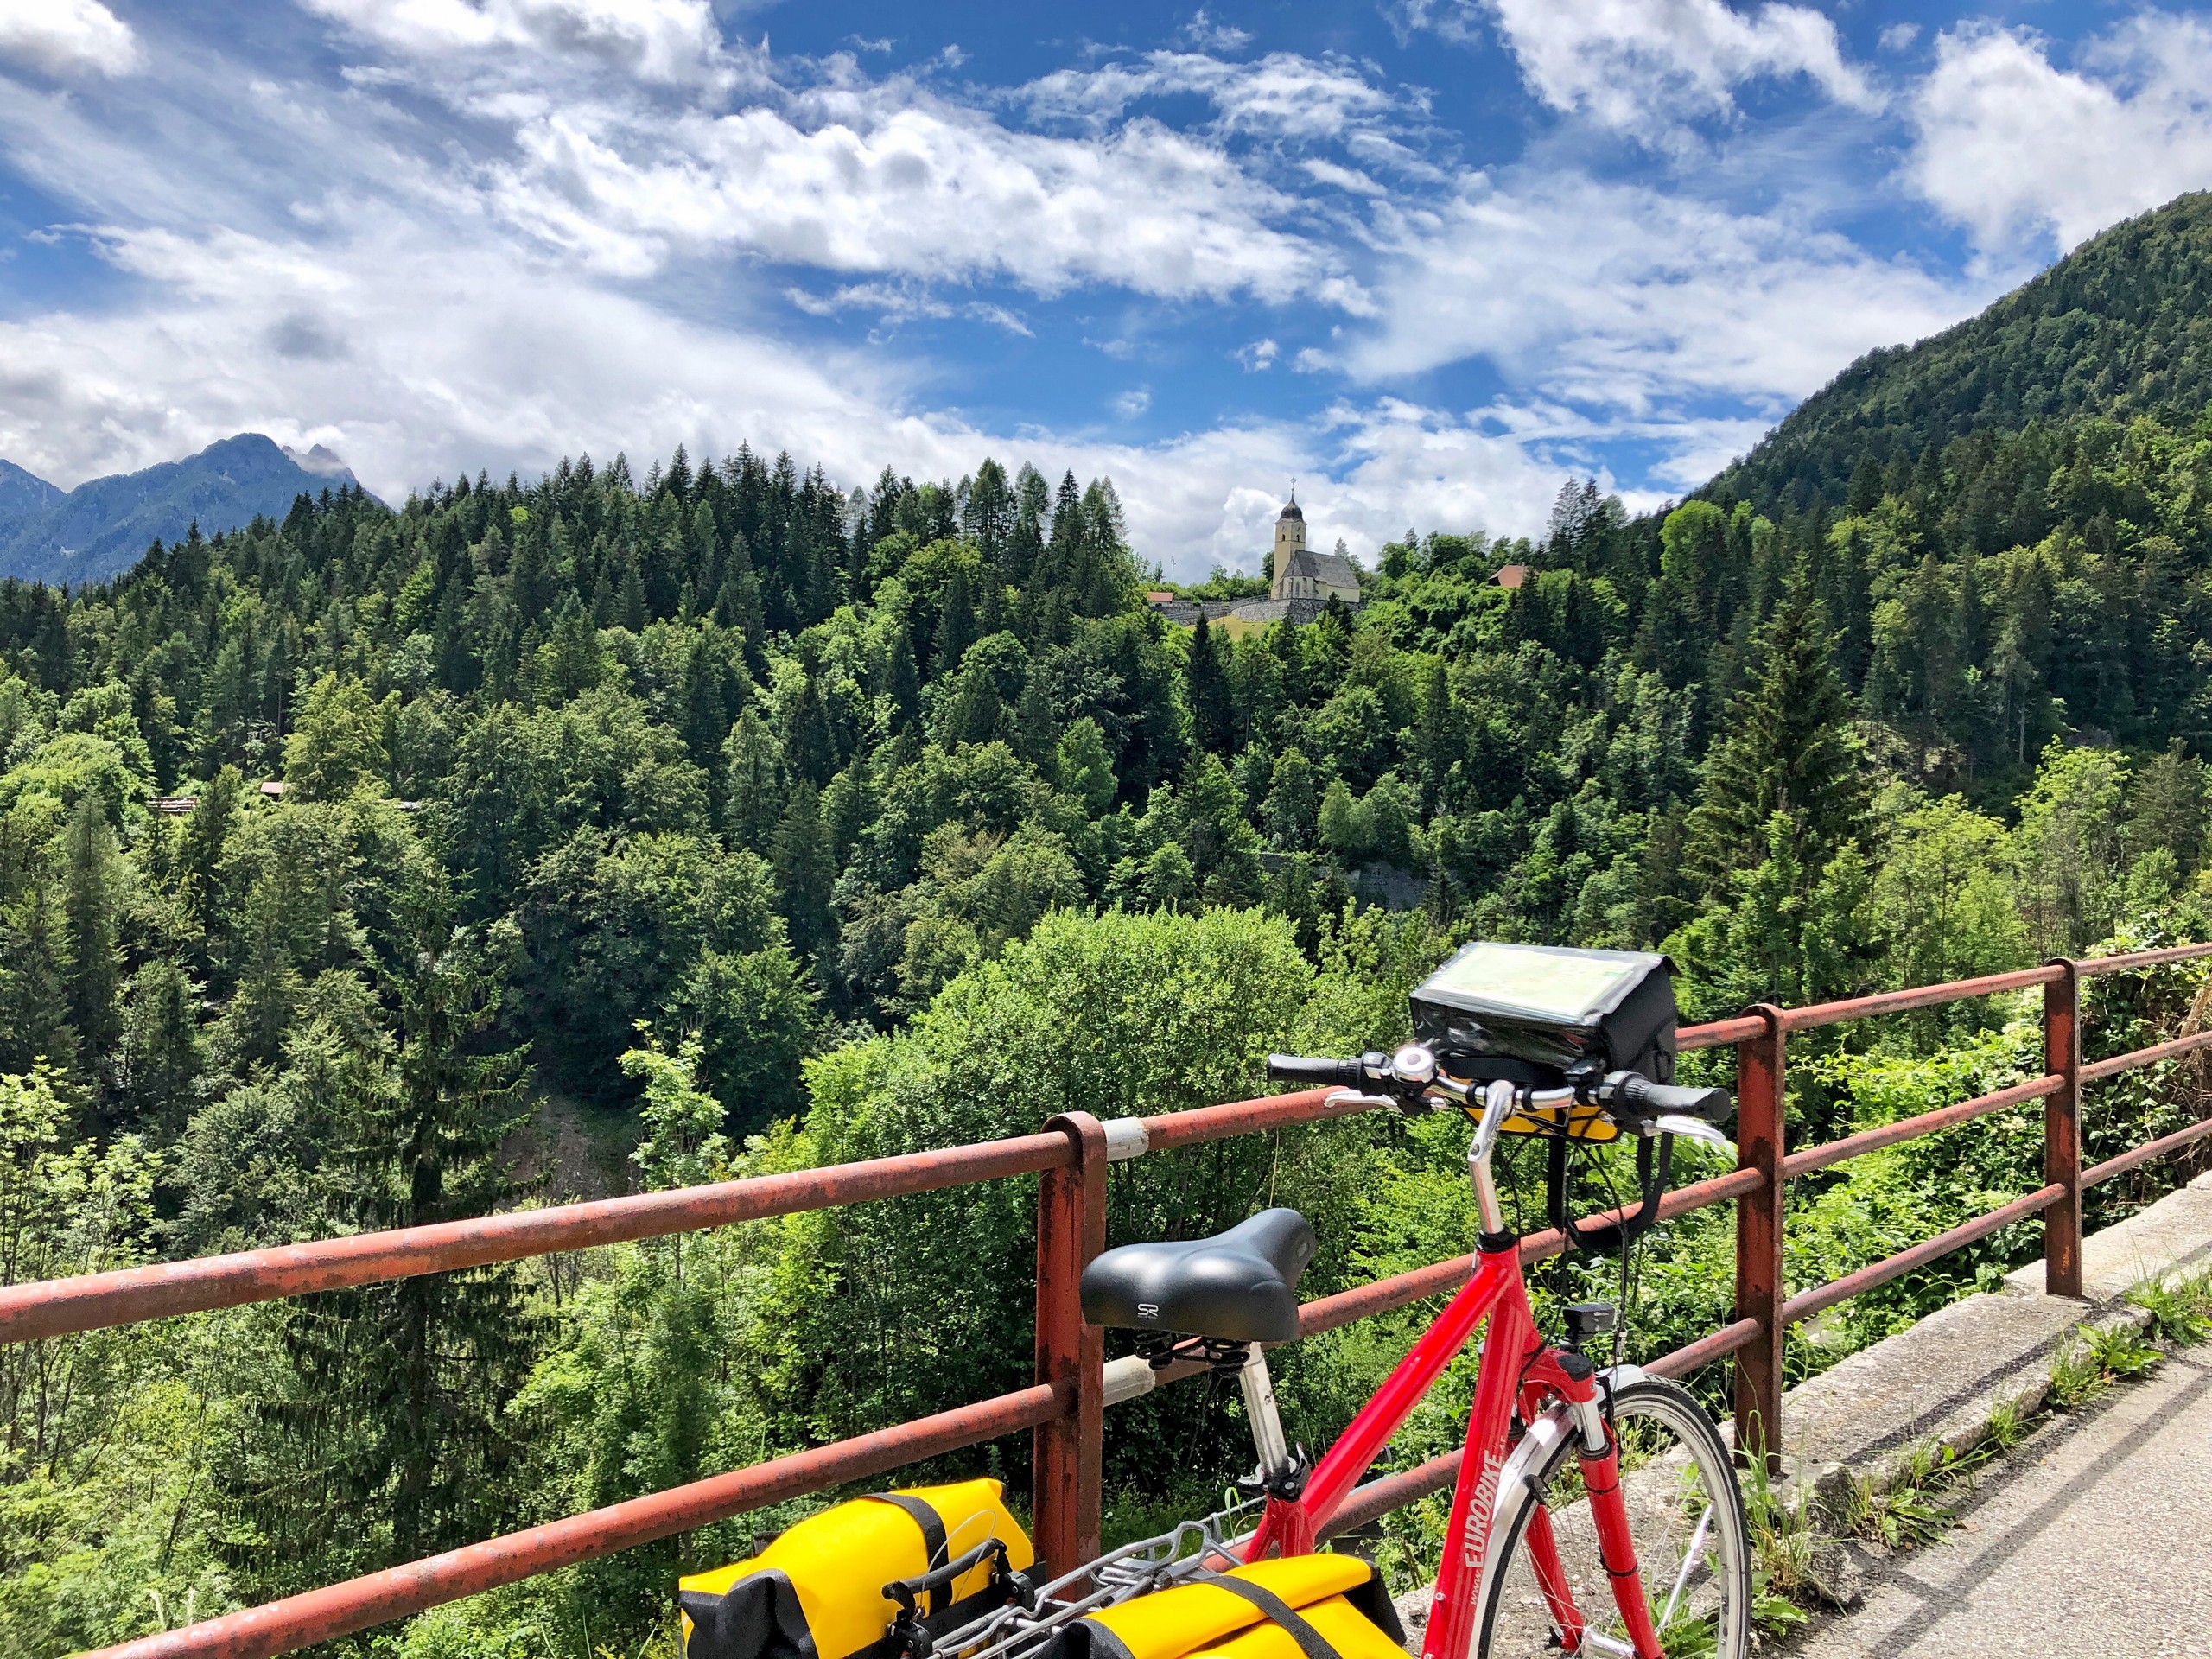 Looking at a beautiful church from Alpe Adria trail